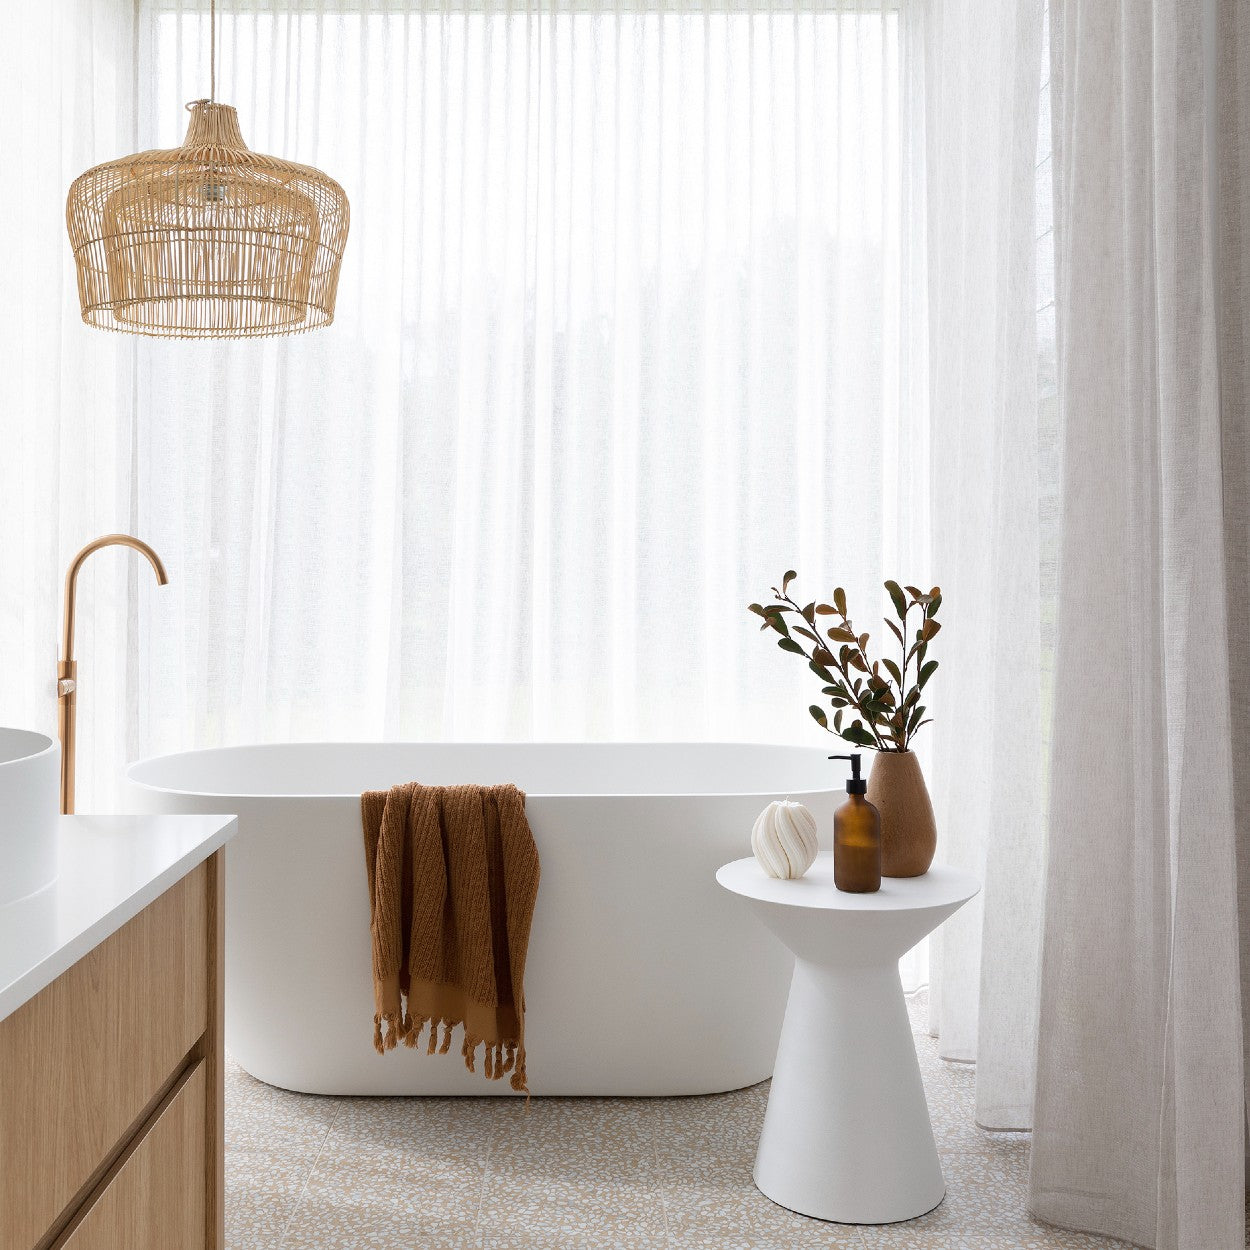 Rattan pendant light buy online Australia. Double caged rattan pendant hanging above a large white free standing bath surrounded by floor to ceiling sheer linen curtains.